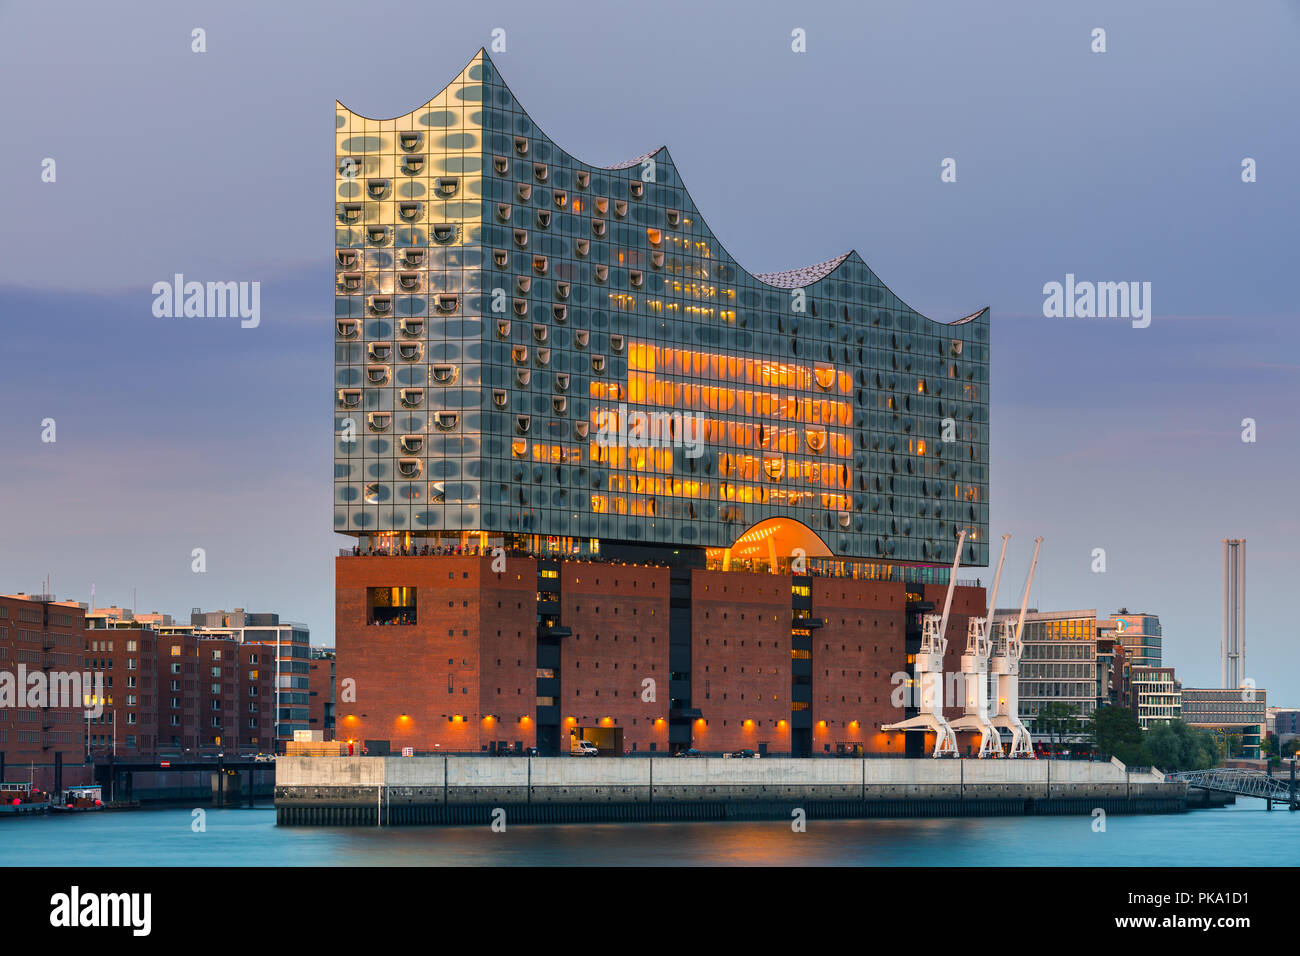 The Elbphilharmonie (Elbe Philharmonic Hall) is a concert hall in the HafenCity quarter of Hamburg, Germany, on the peninsula of the Elbe River. It is Stock Photo